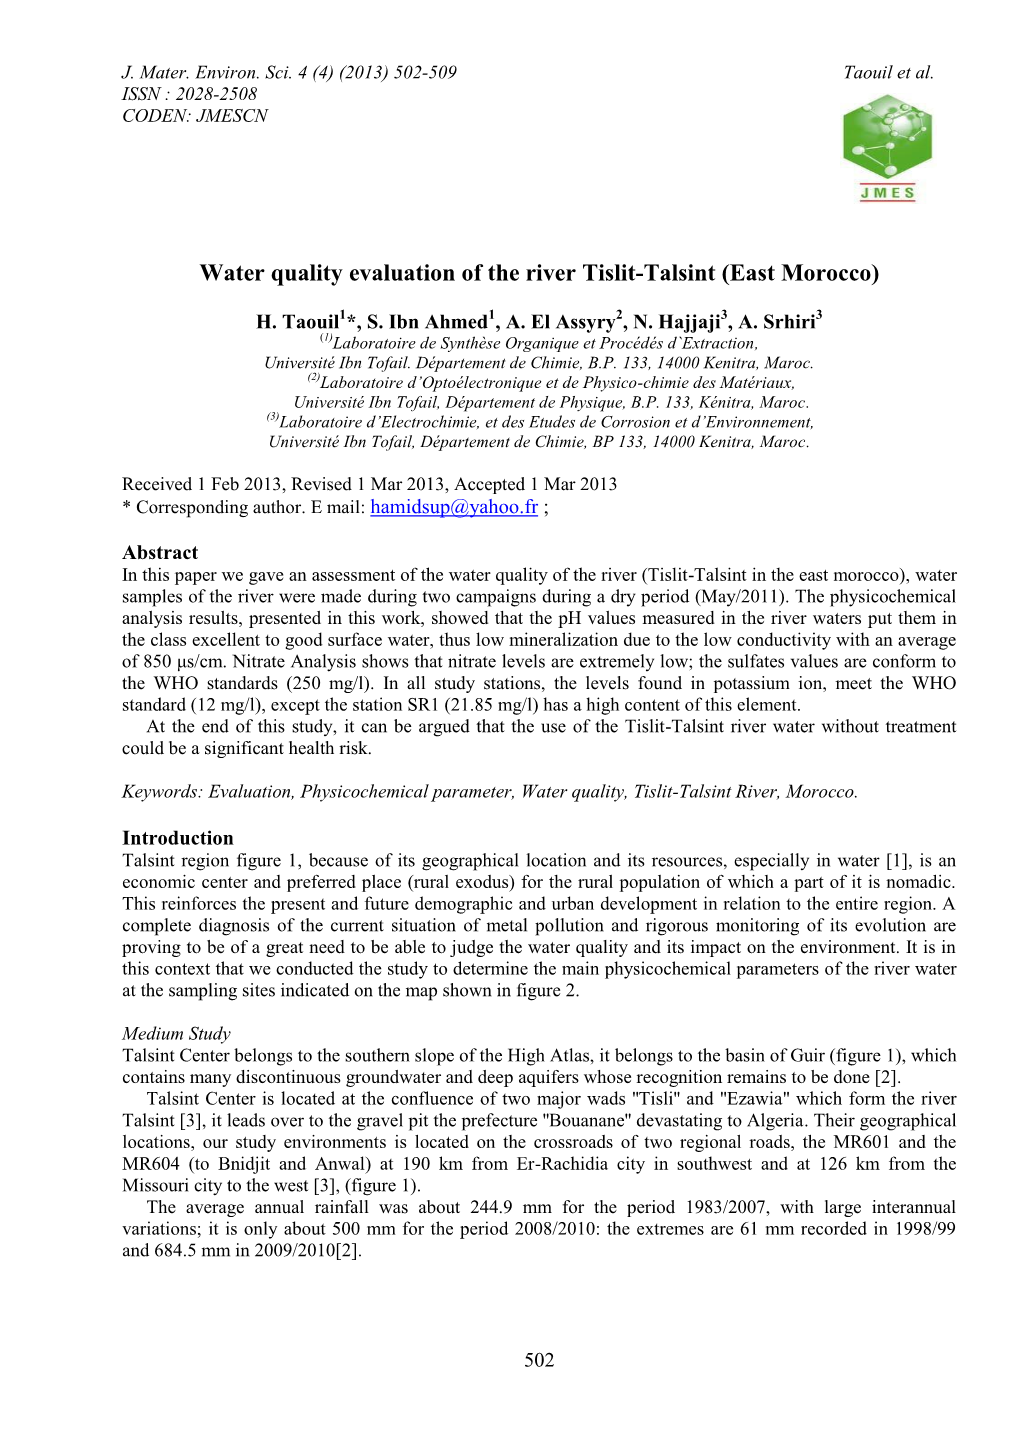 Water Quality Evaluation of the River Tislit-Talsint (East Morocco)